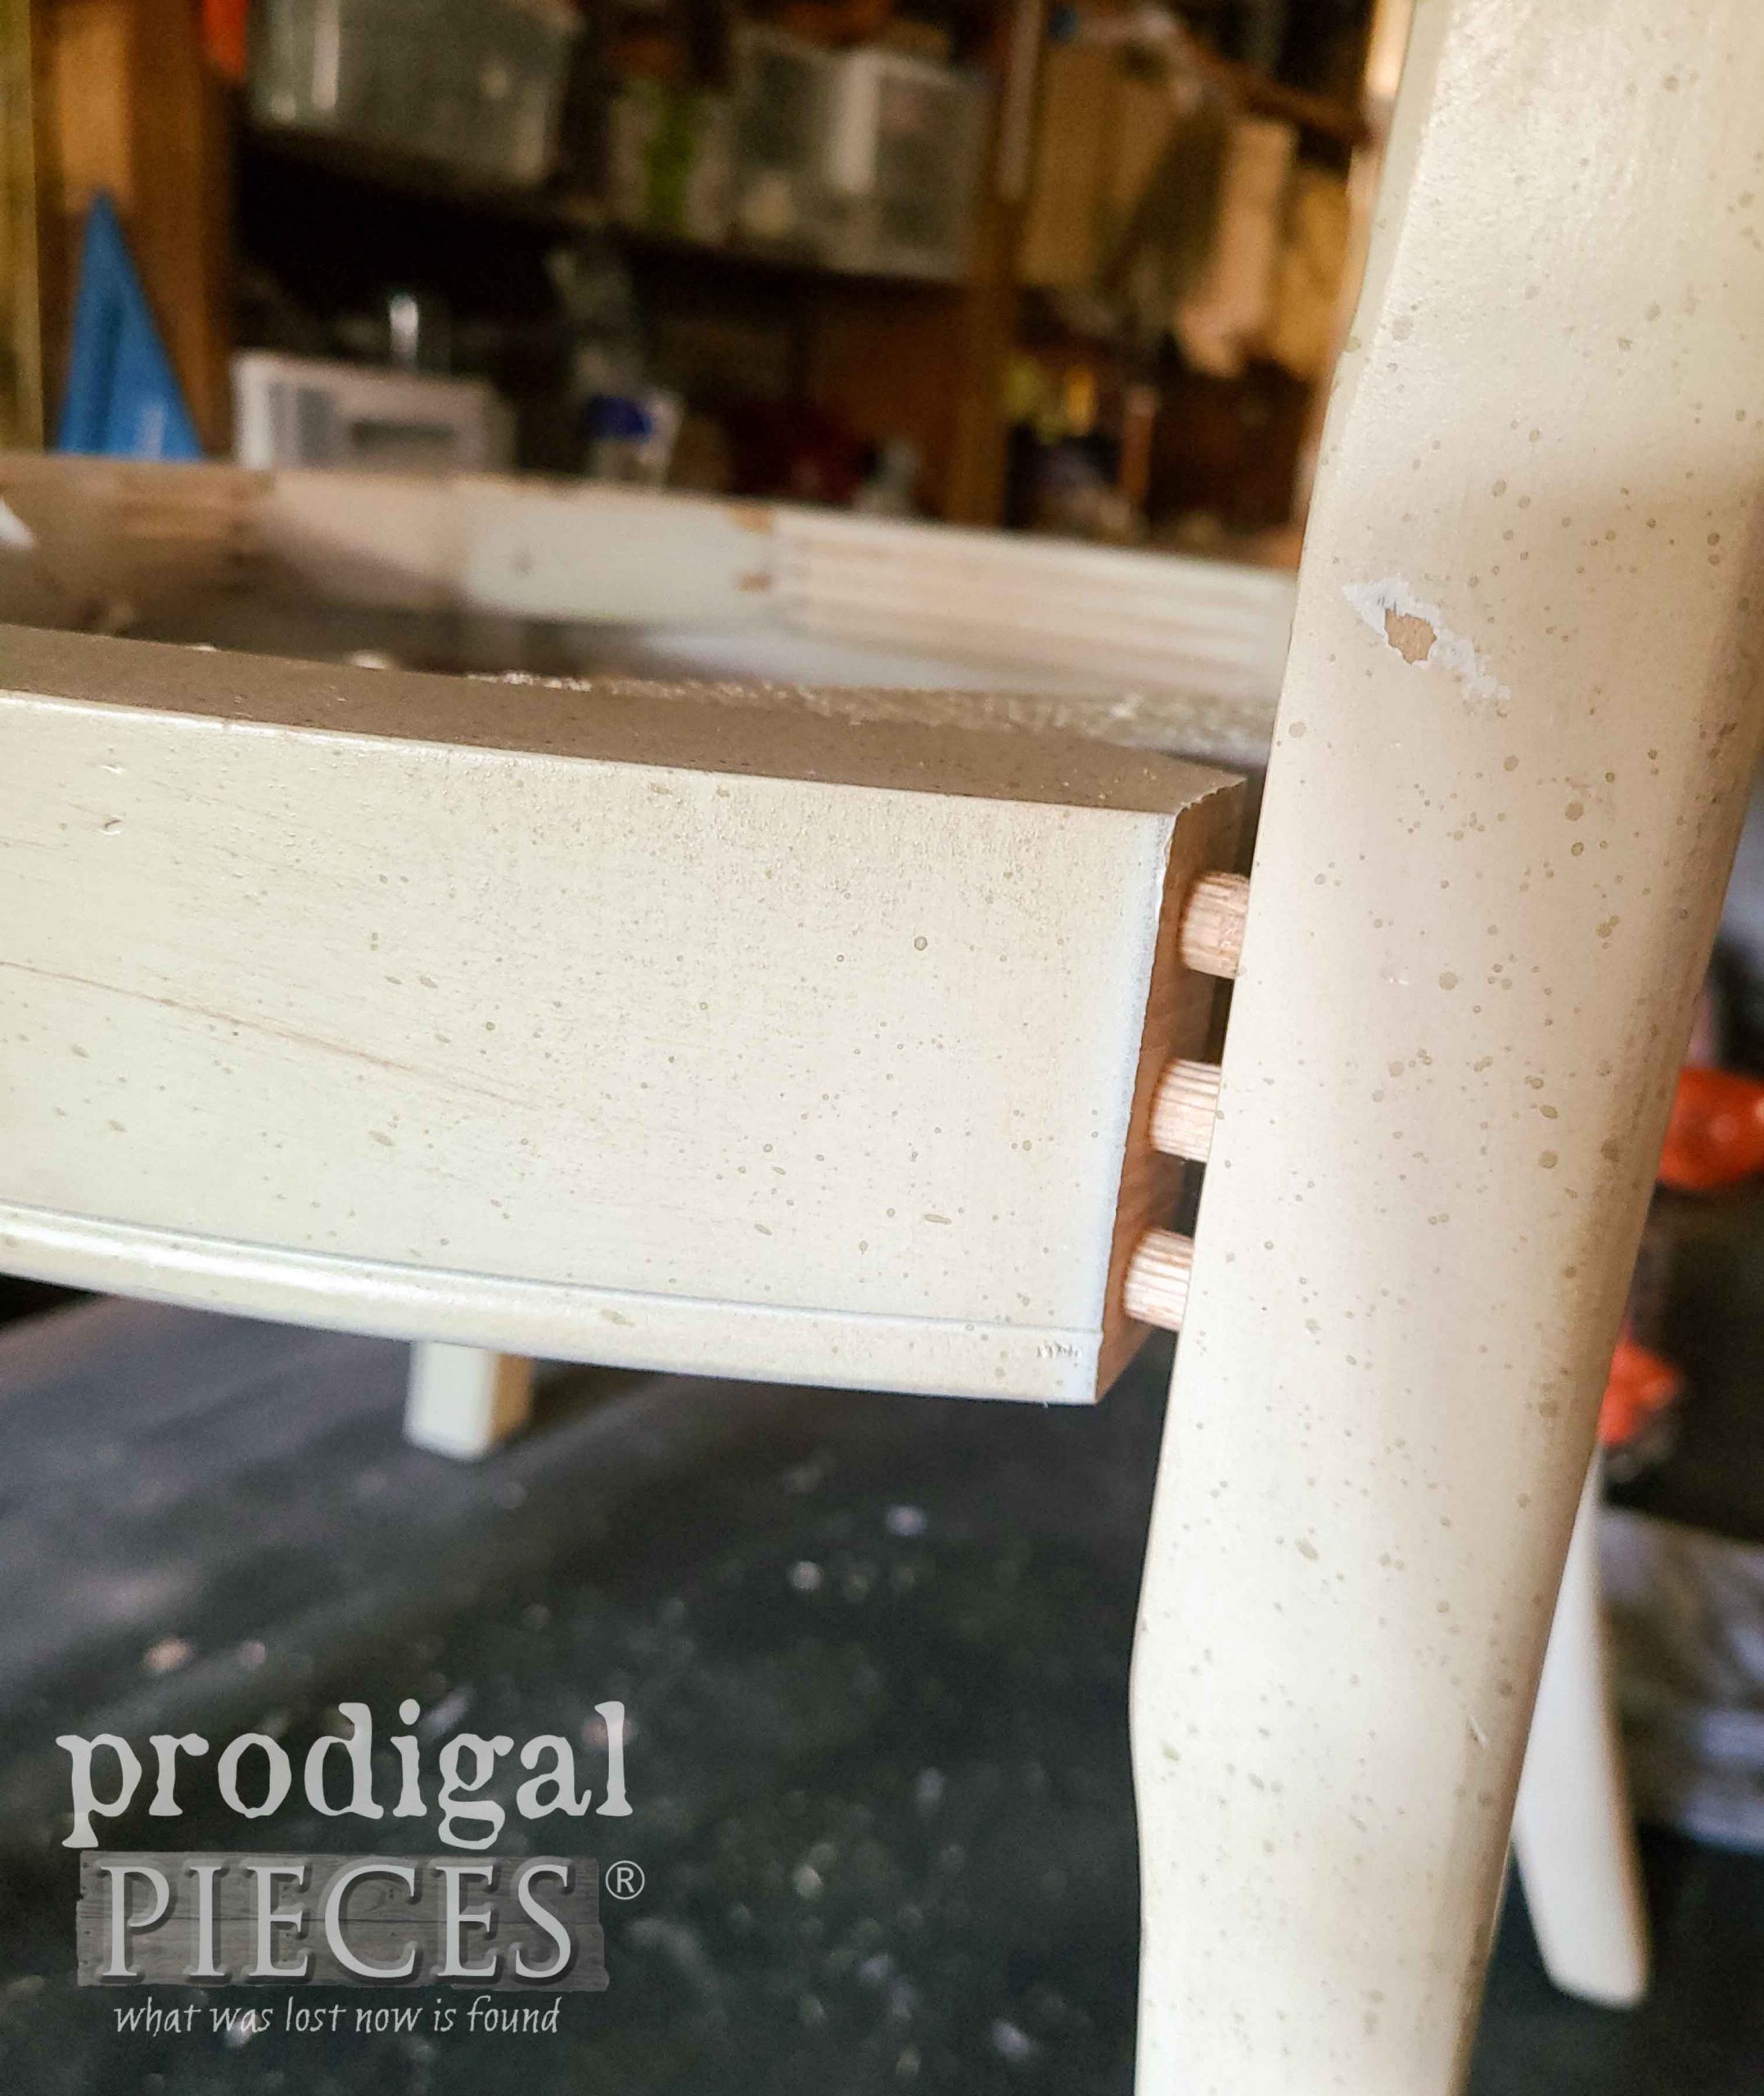 Upholstered Chair Coming Apart | prodigalpieces.com